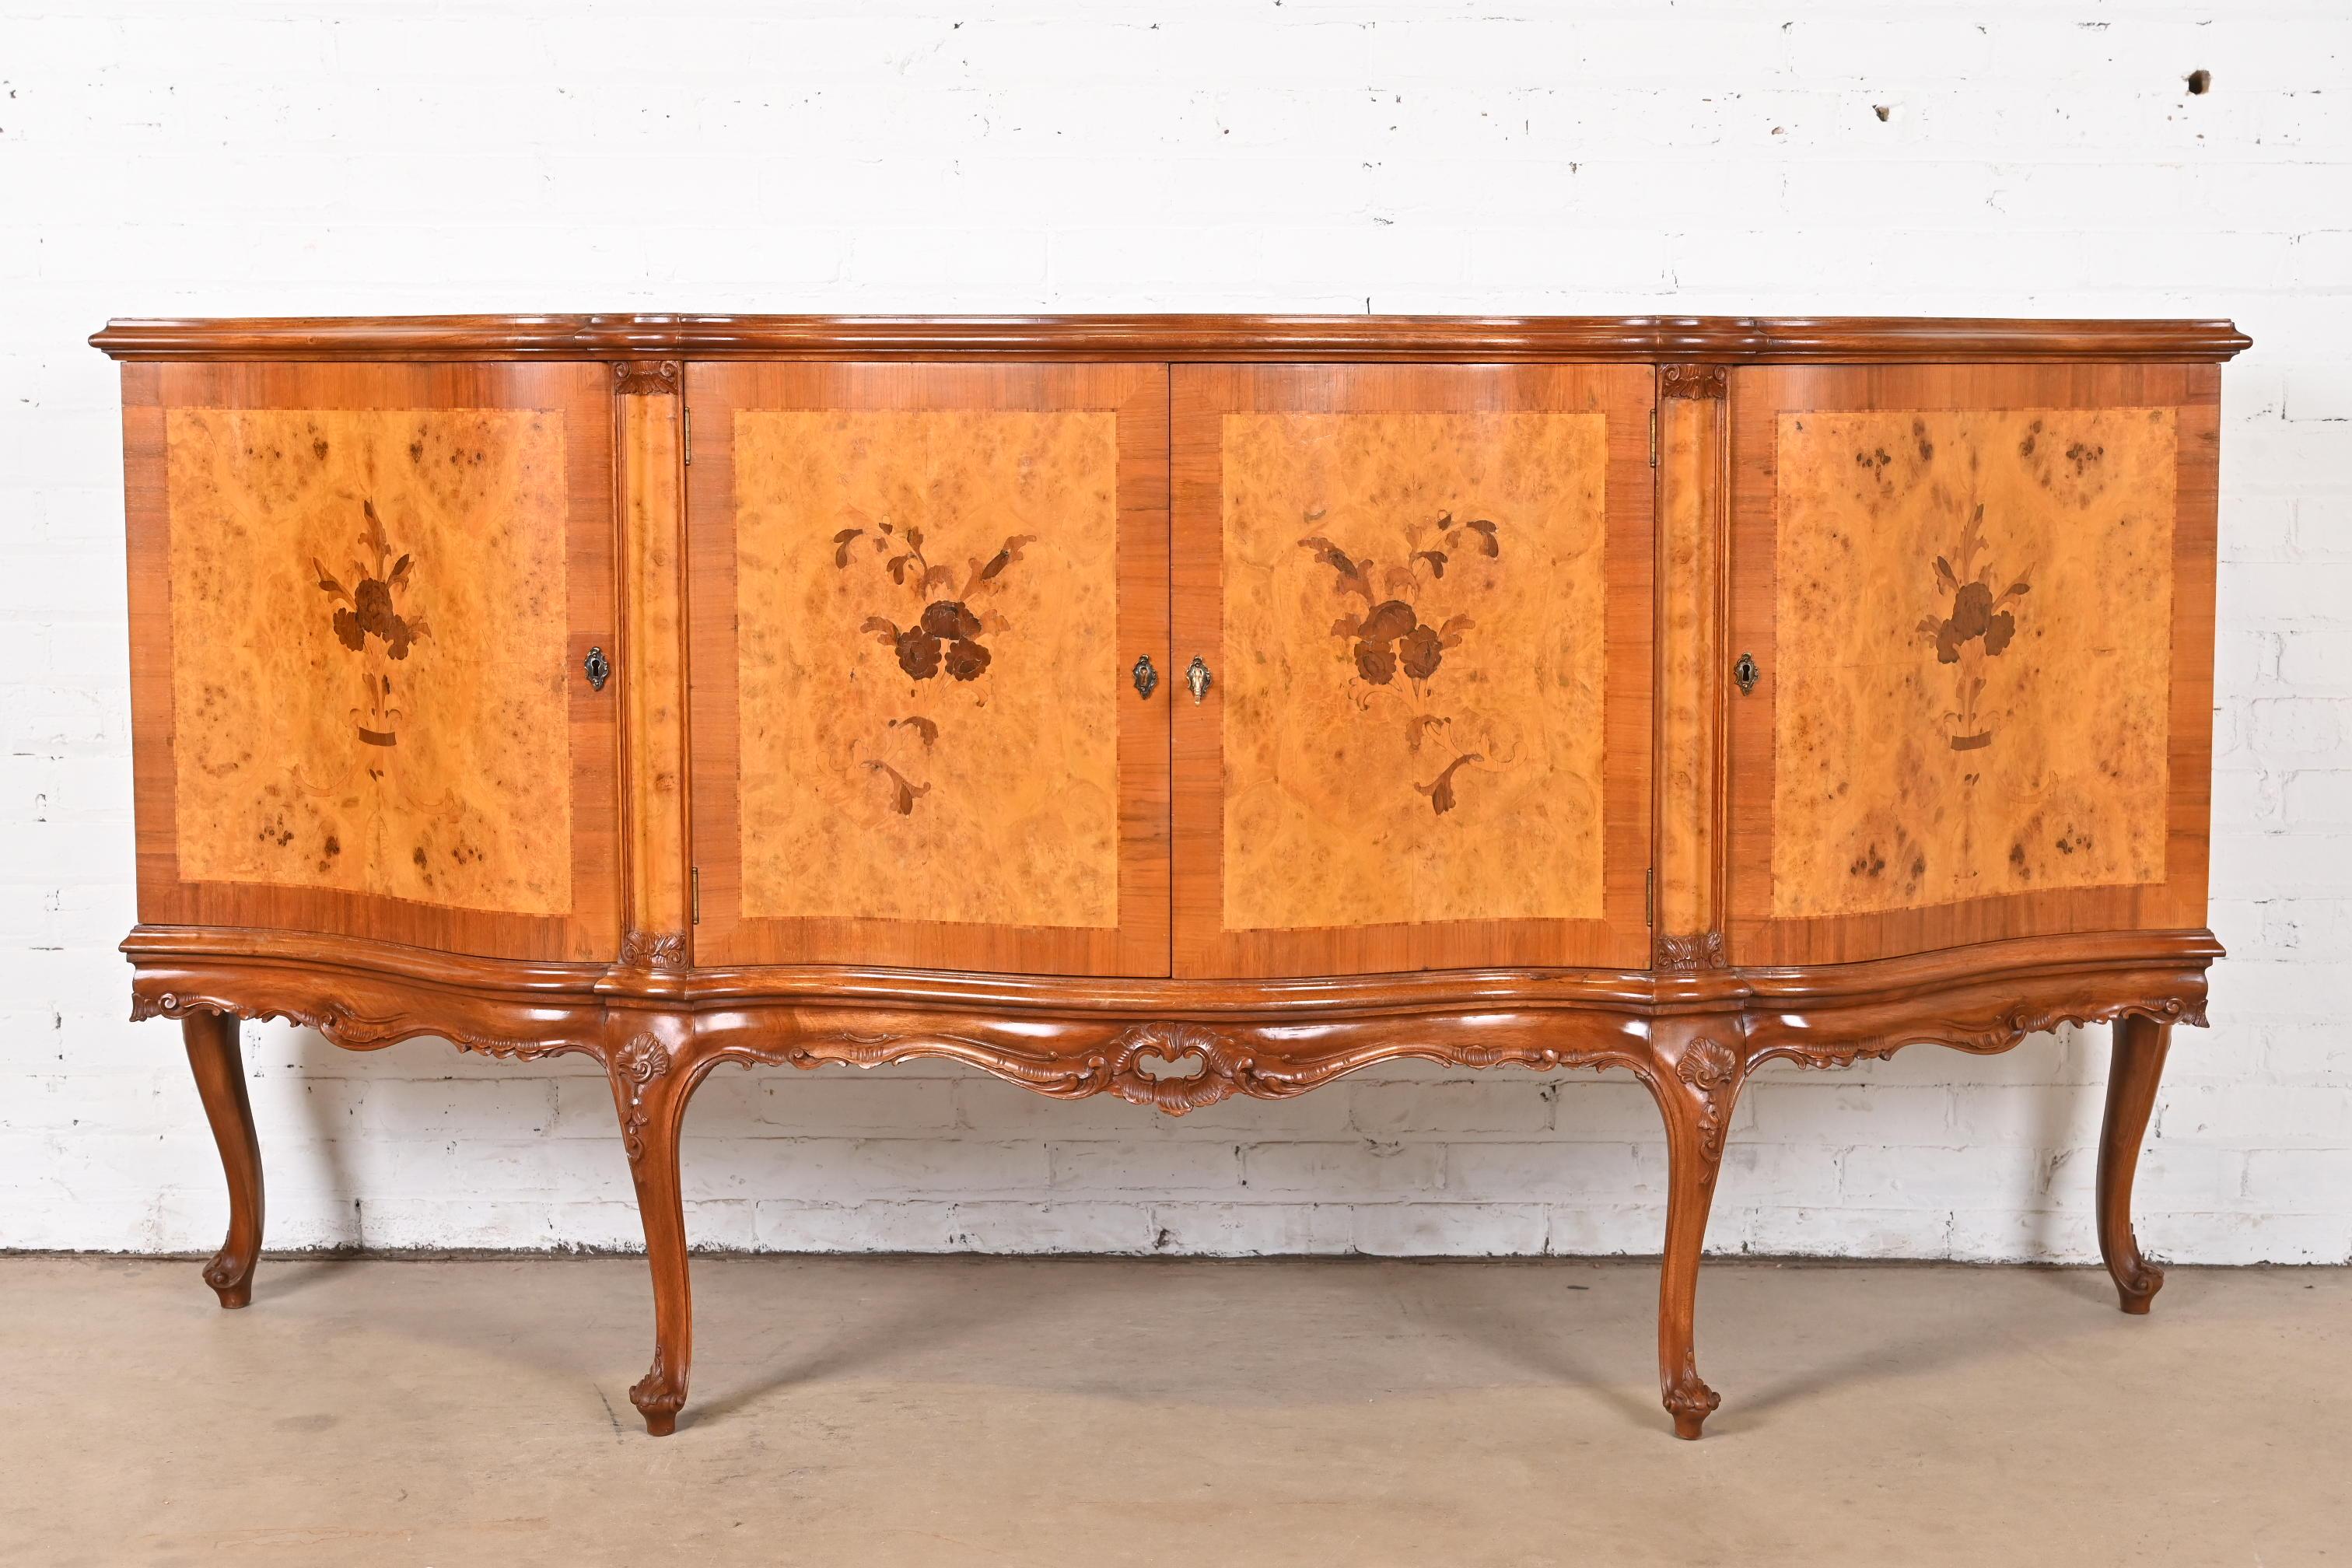 A gorgeous Italian Louis XV style sideboard, credenza, buffet server, or bar cabinet

Italy, Circa 1940s

Stunning burled olive wood, with inlaid floral marquetry, carved walnut legs and brass hardware. Cabinet locks, and key is included.

Measures: